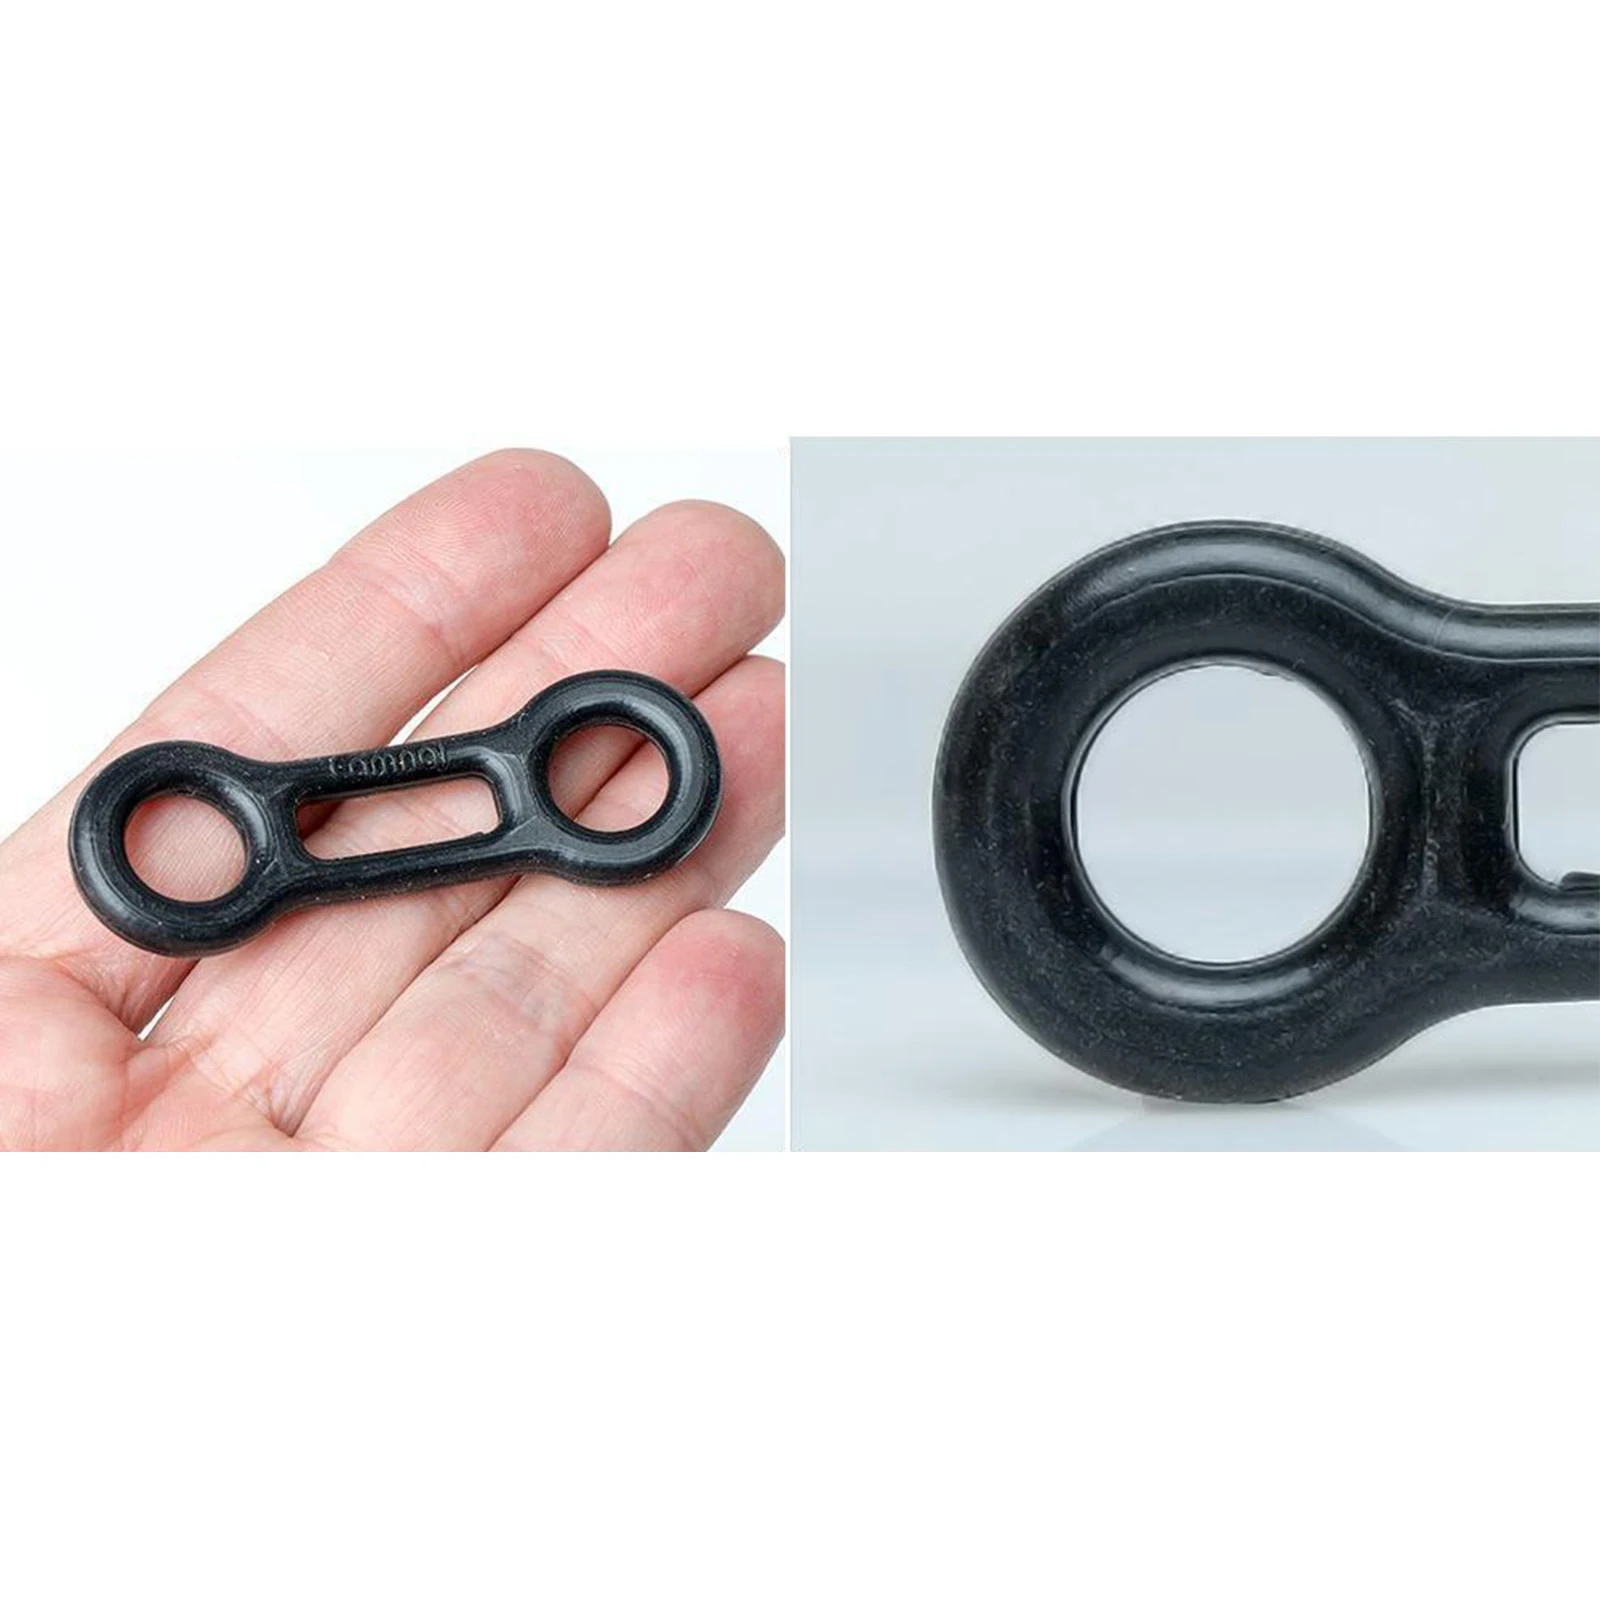 Plastic Carabiner Rope Locking Tool Rigging Fixing Device Climbing Safety  Equipment, for Working-At-Height